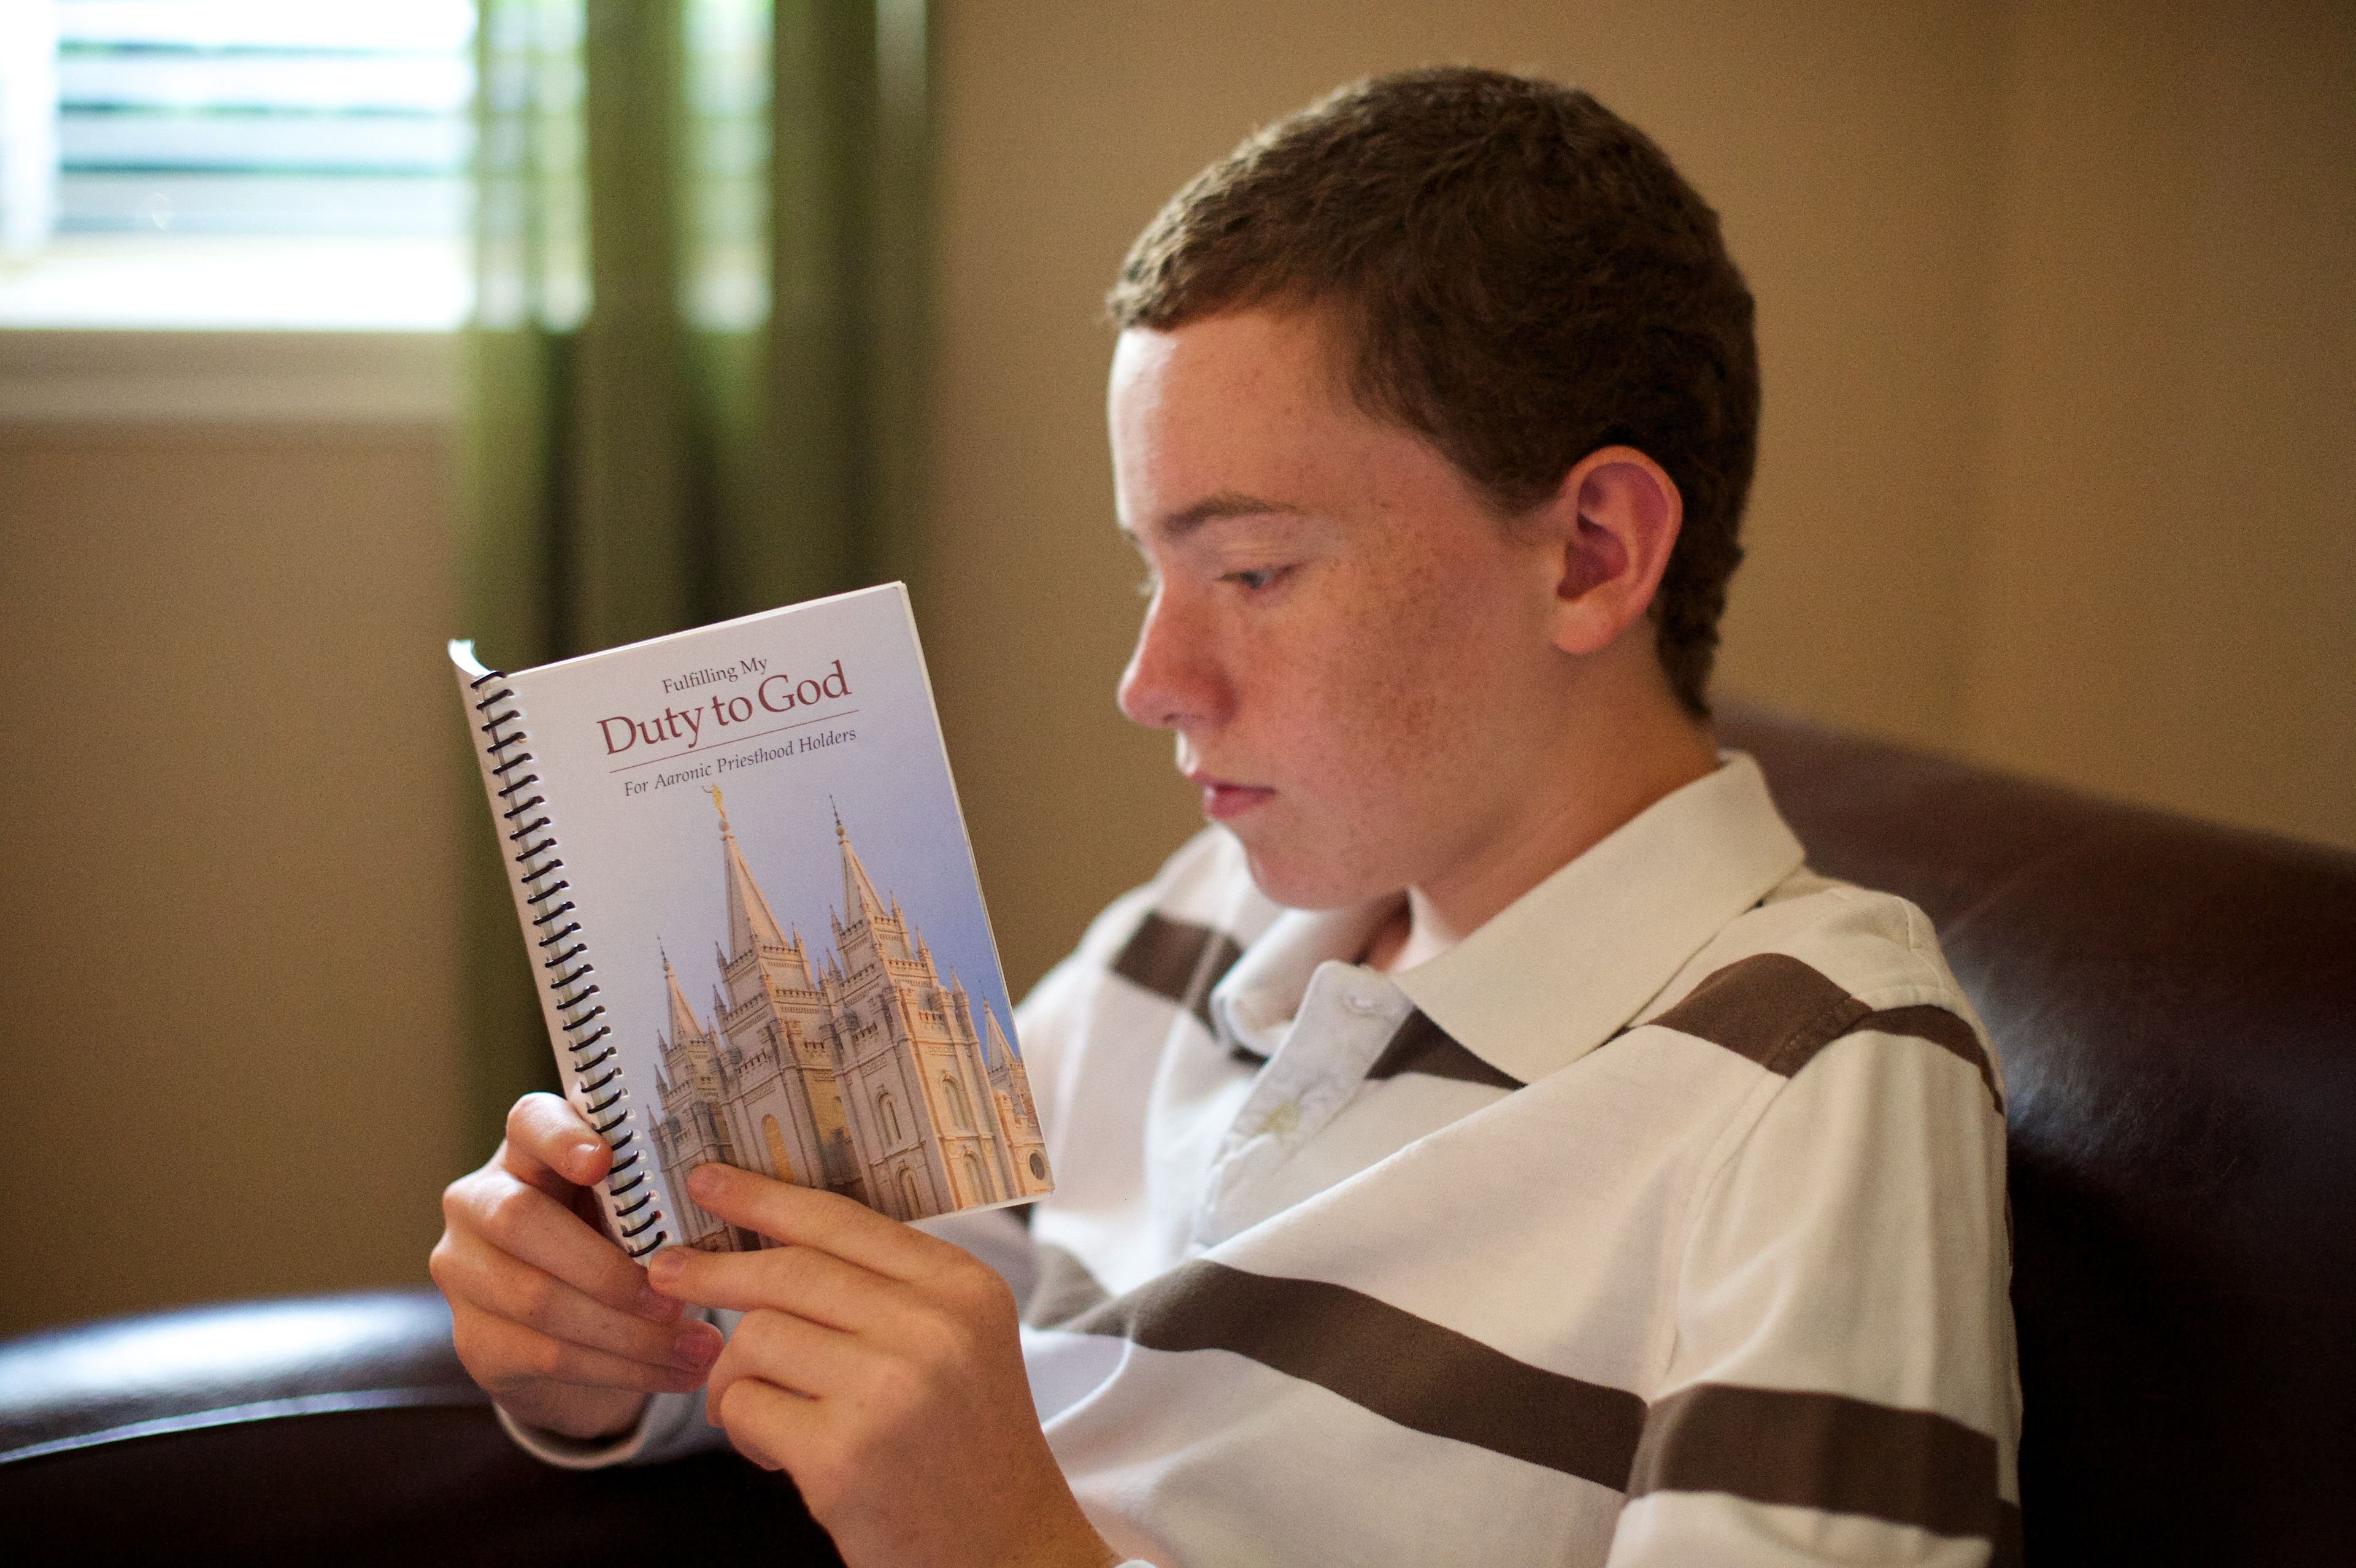 A young man sits in an armchair and reads from the booklet Fulfilling My Duty to God.